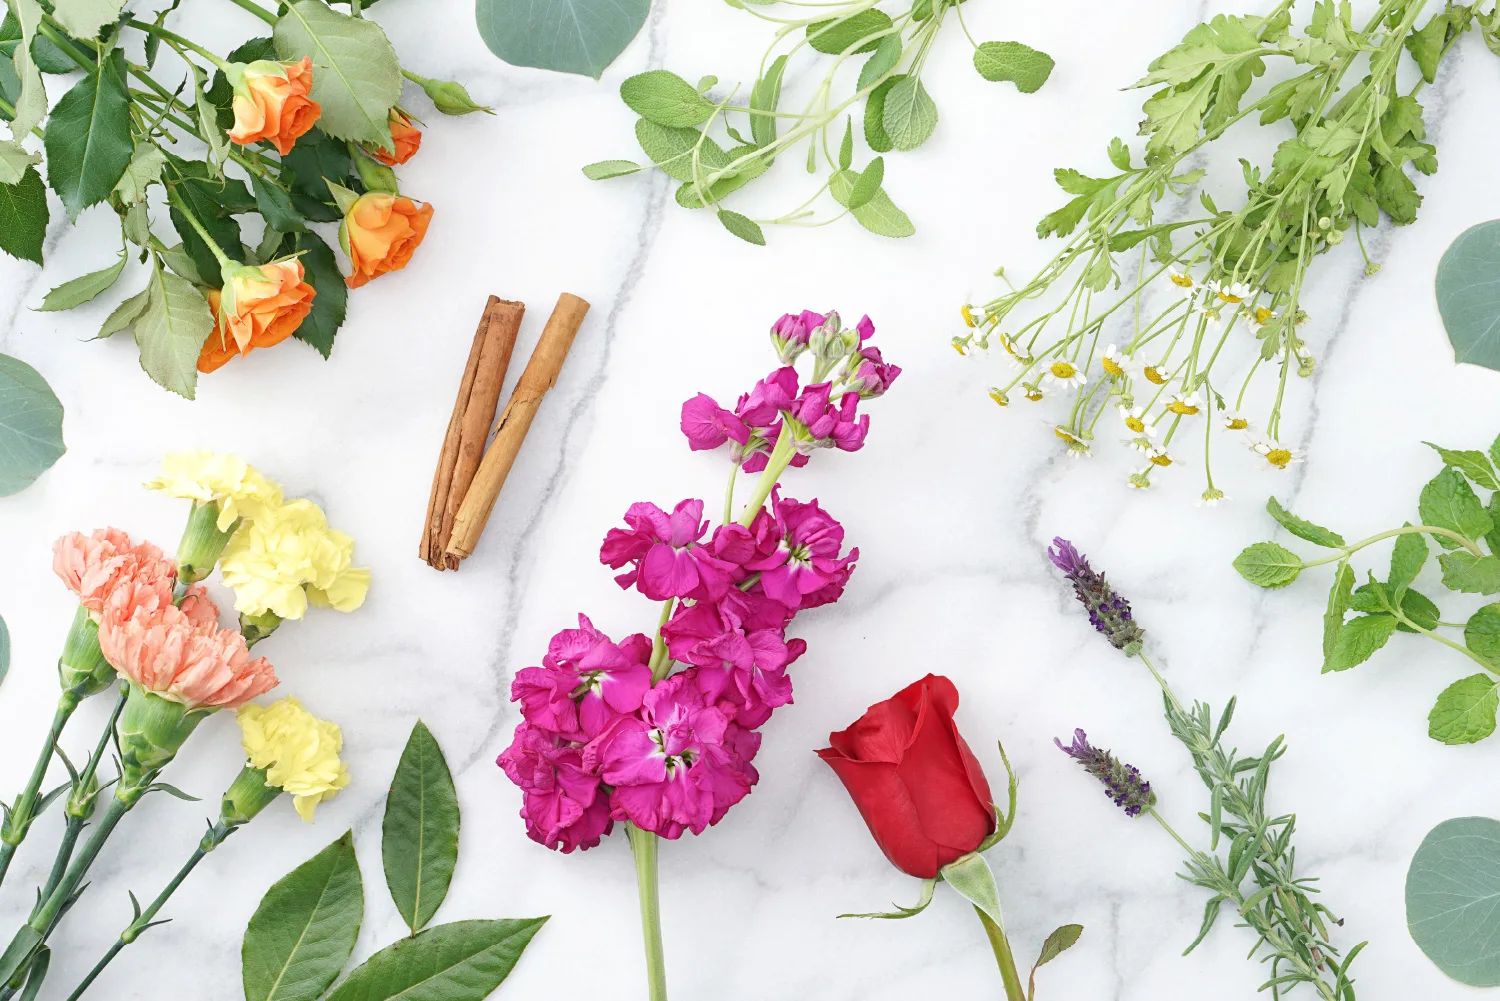 How-to-make-incense-flowers-herbs